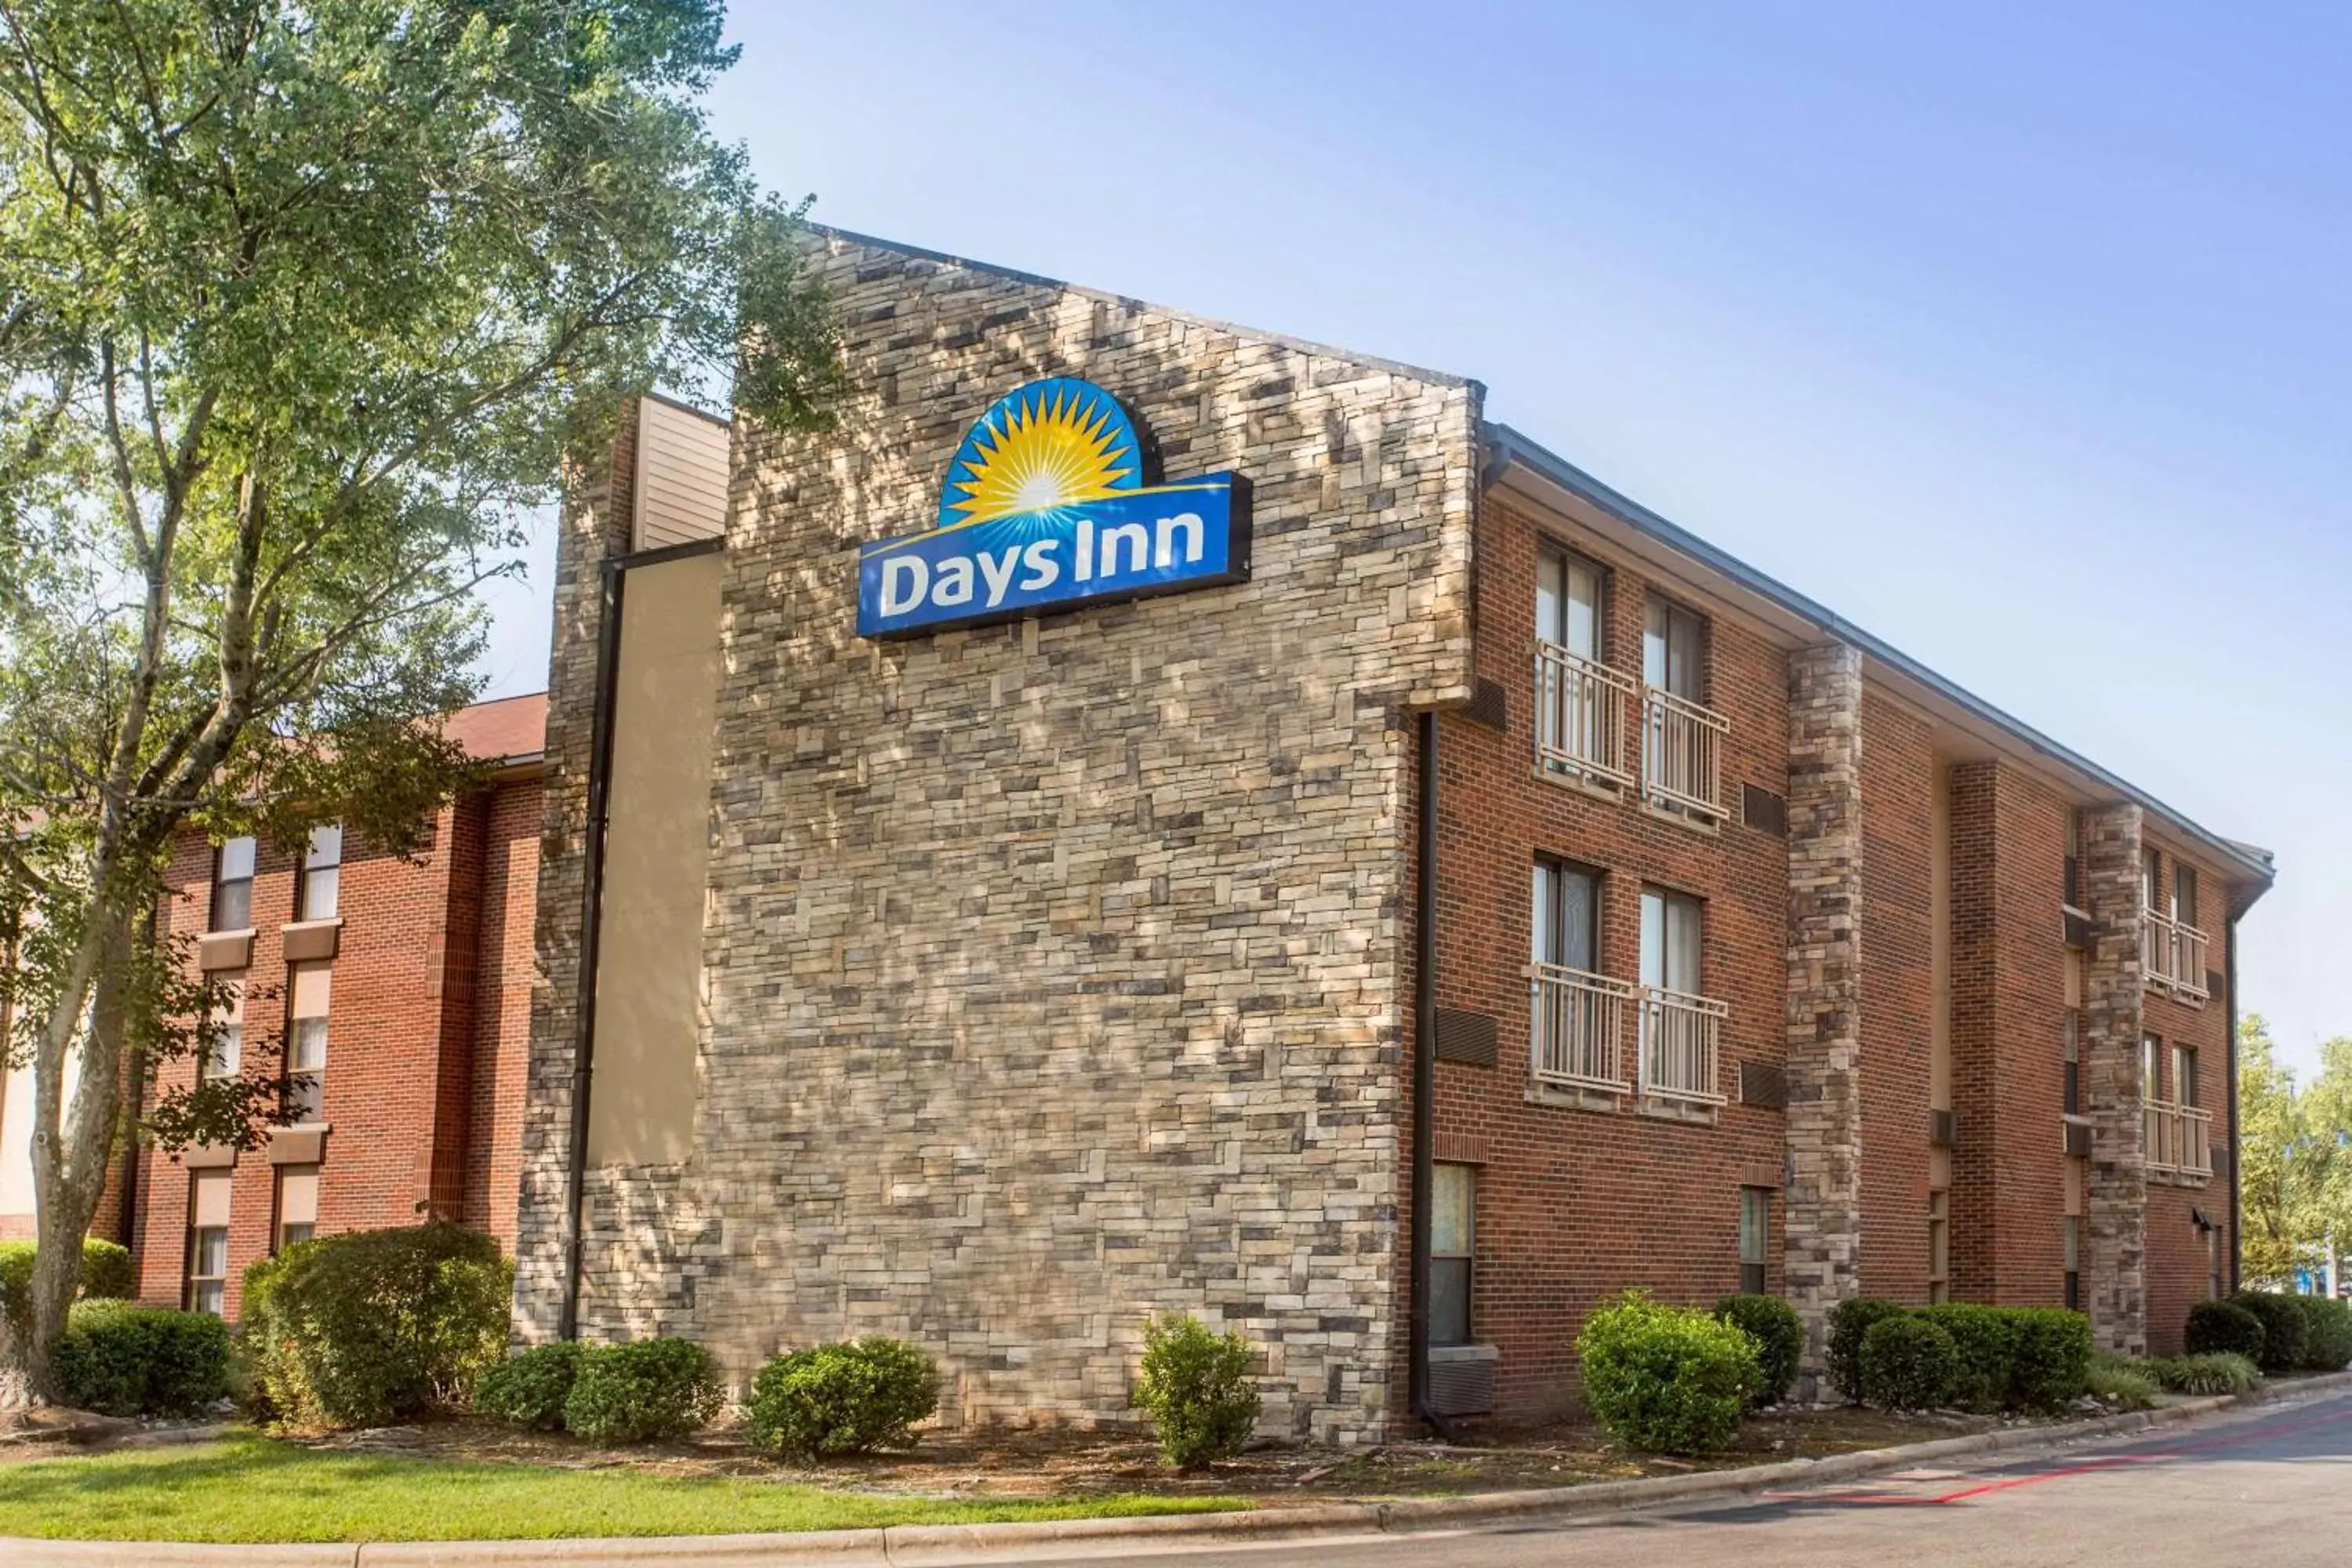 Property building in Days Inn by Wyndham Raleigh-Airport-Research Triangle Park